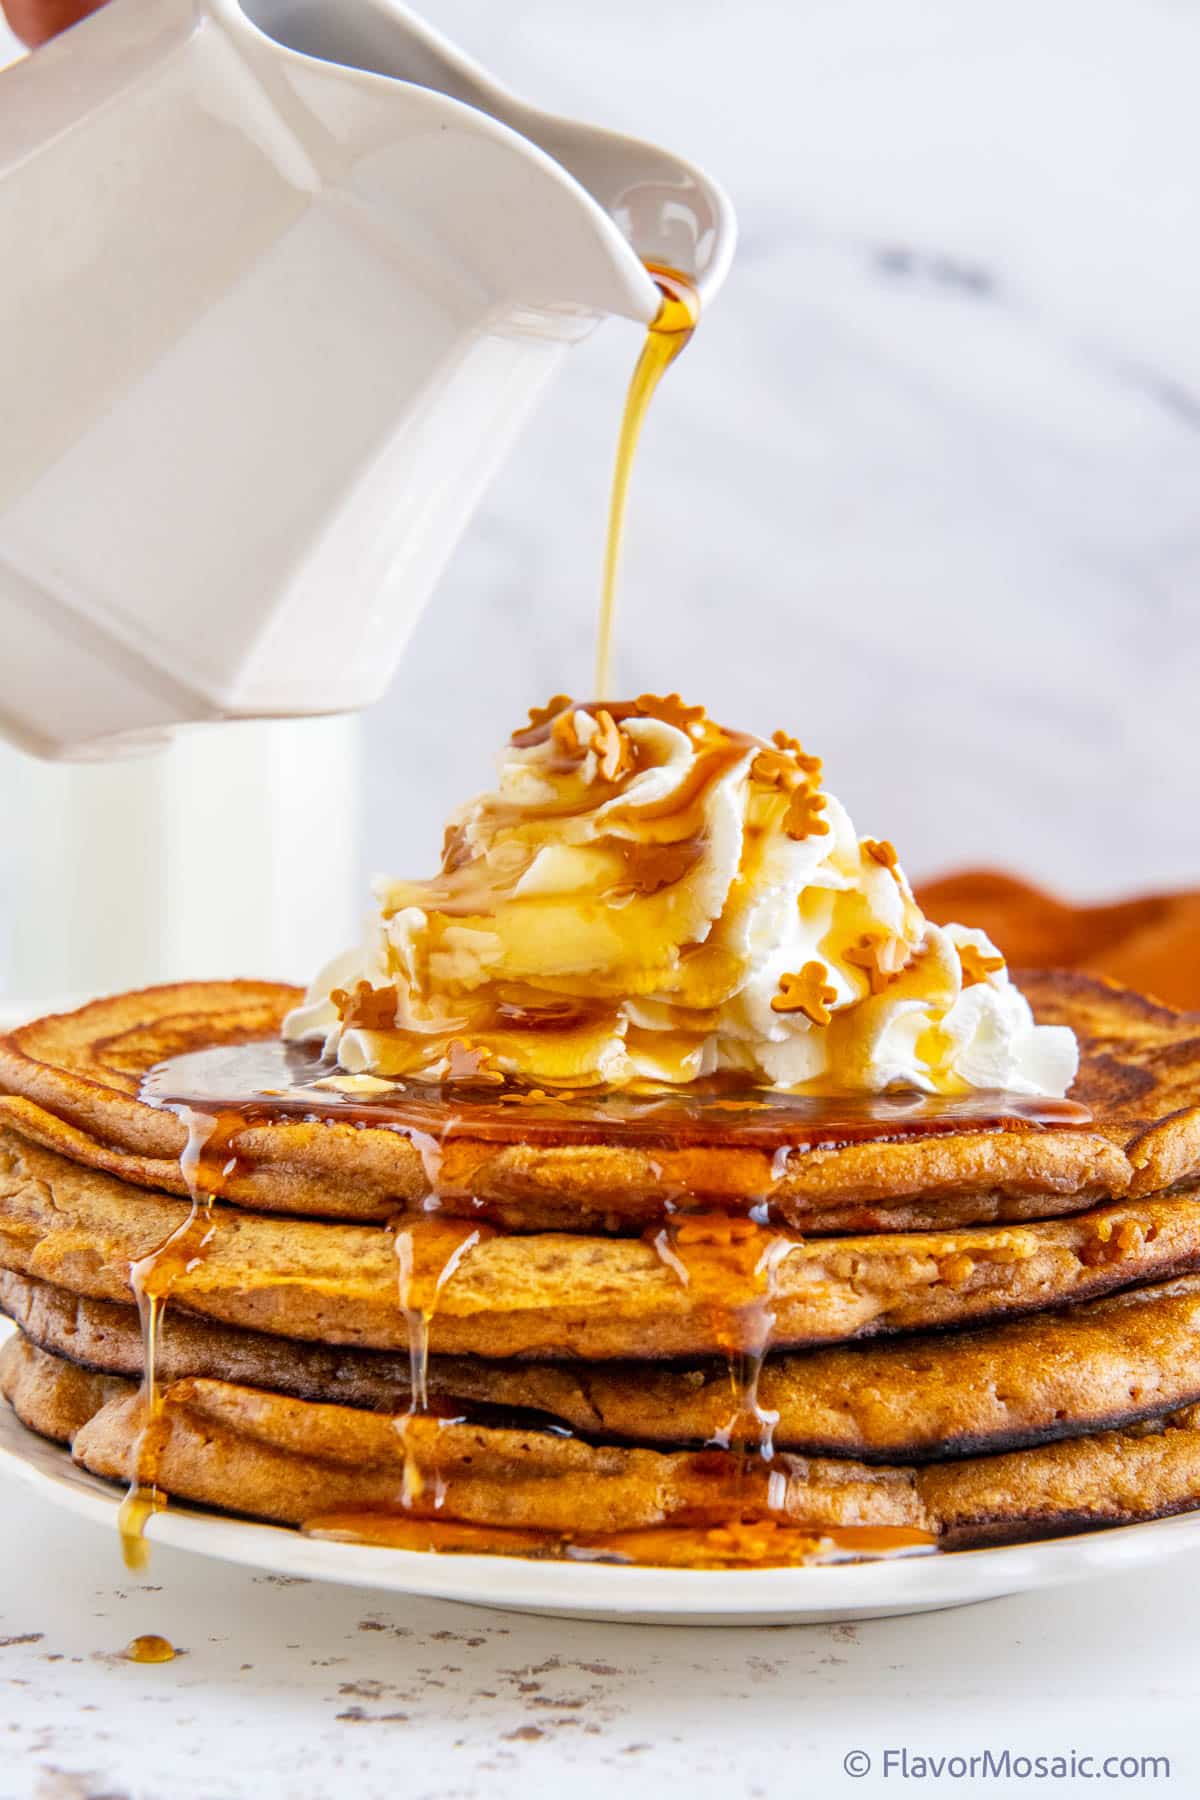 White pitcher pouring maple syrup over a stack of 4 gingerbread pancakes, sitting on a white plate against a white marble background, topped with whipped cream, and maple syrup drizzling over the sides of the pancakes.